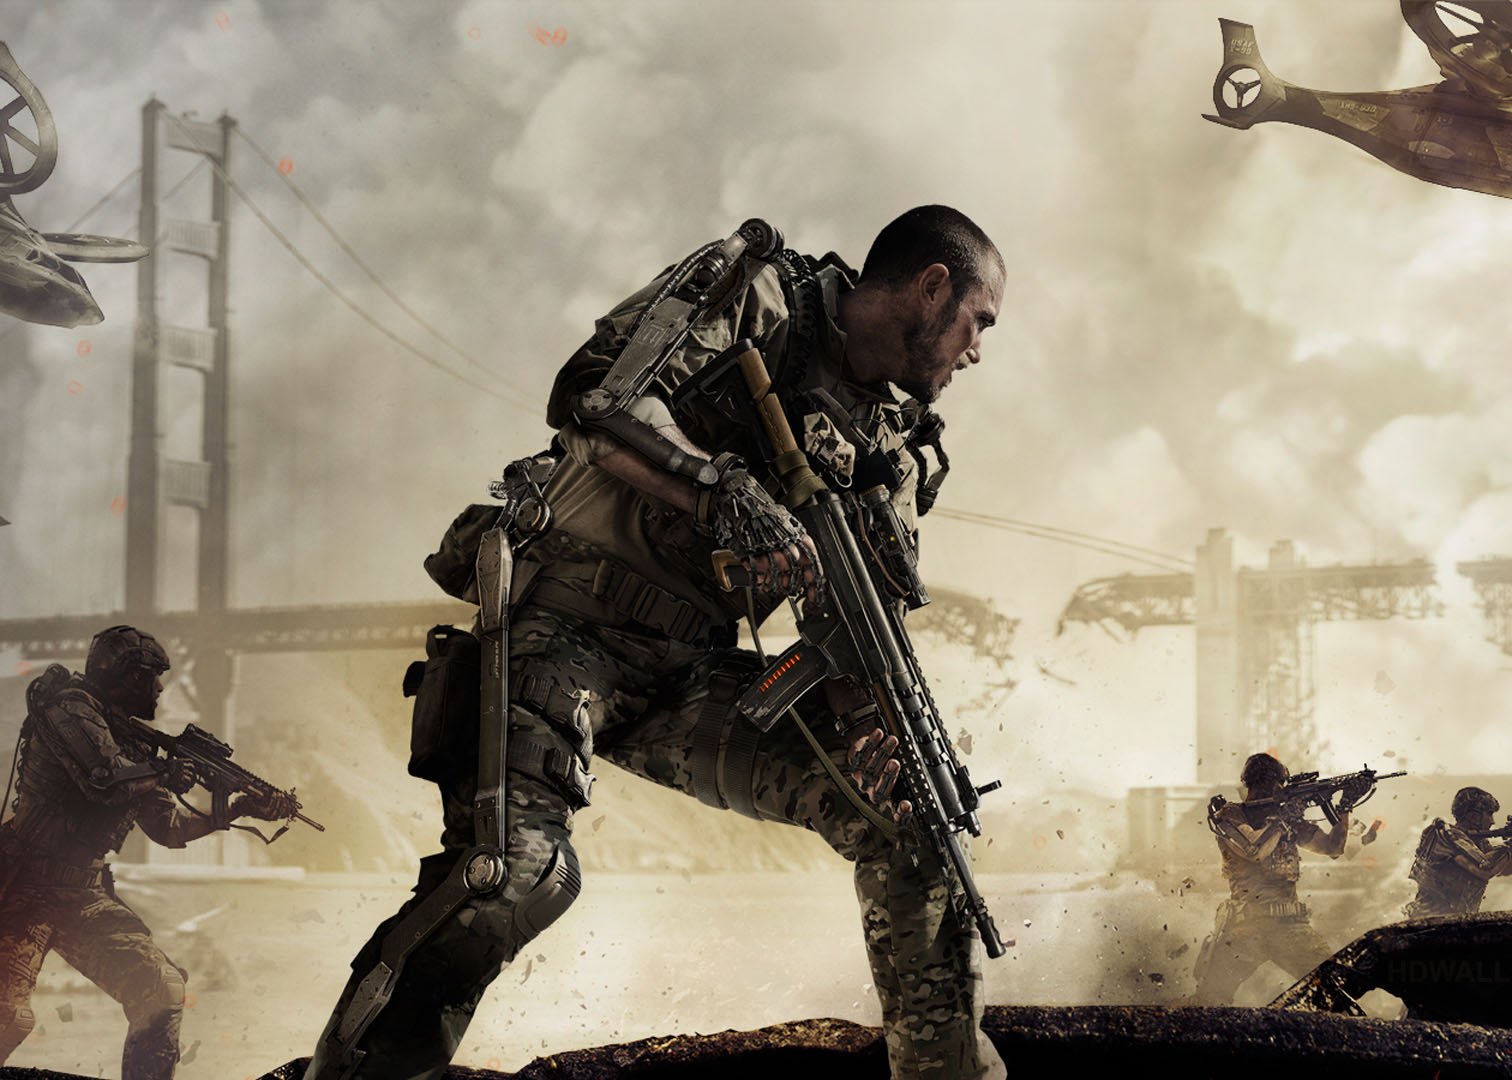 call, Of, Duty, Shooter, War, Warrior, Military, Action, Fighting, Sci fi, Futuristic, Soldier Wallpaper